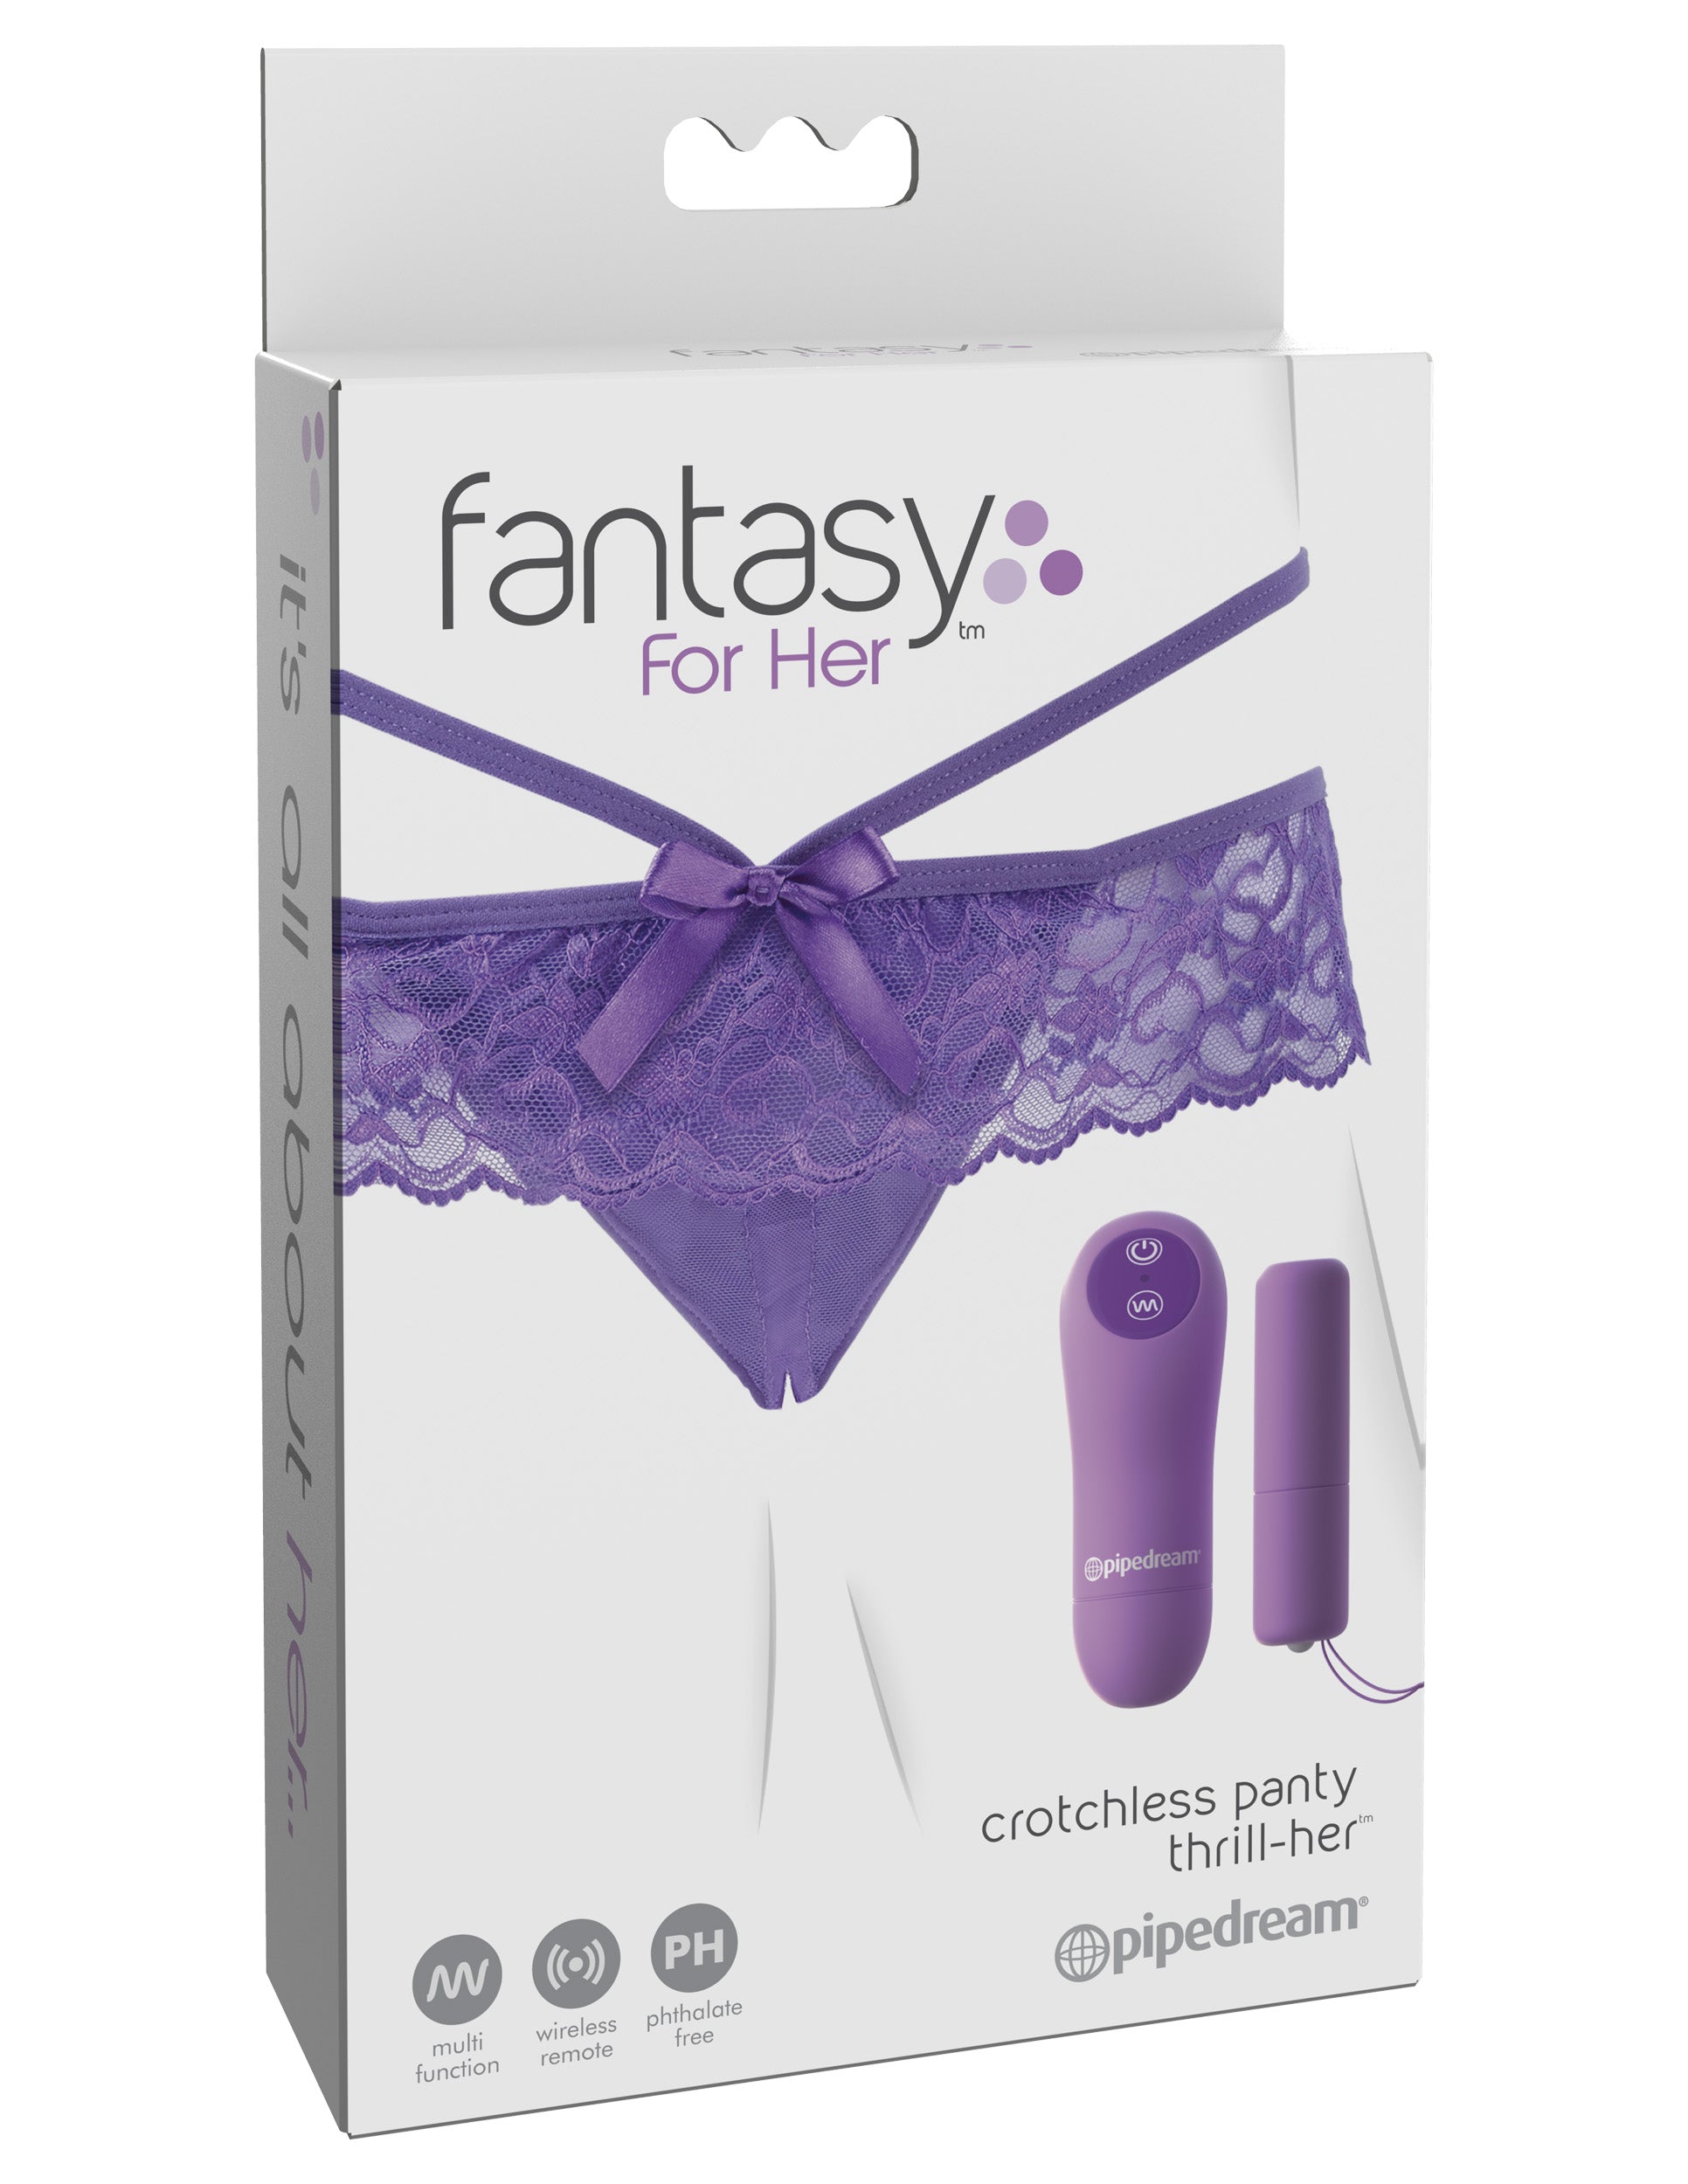 Fantasy for Her Crotchless Panty Thrill-Her-3